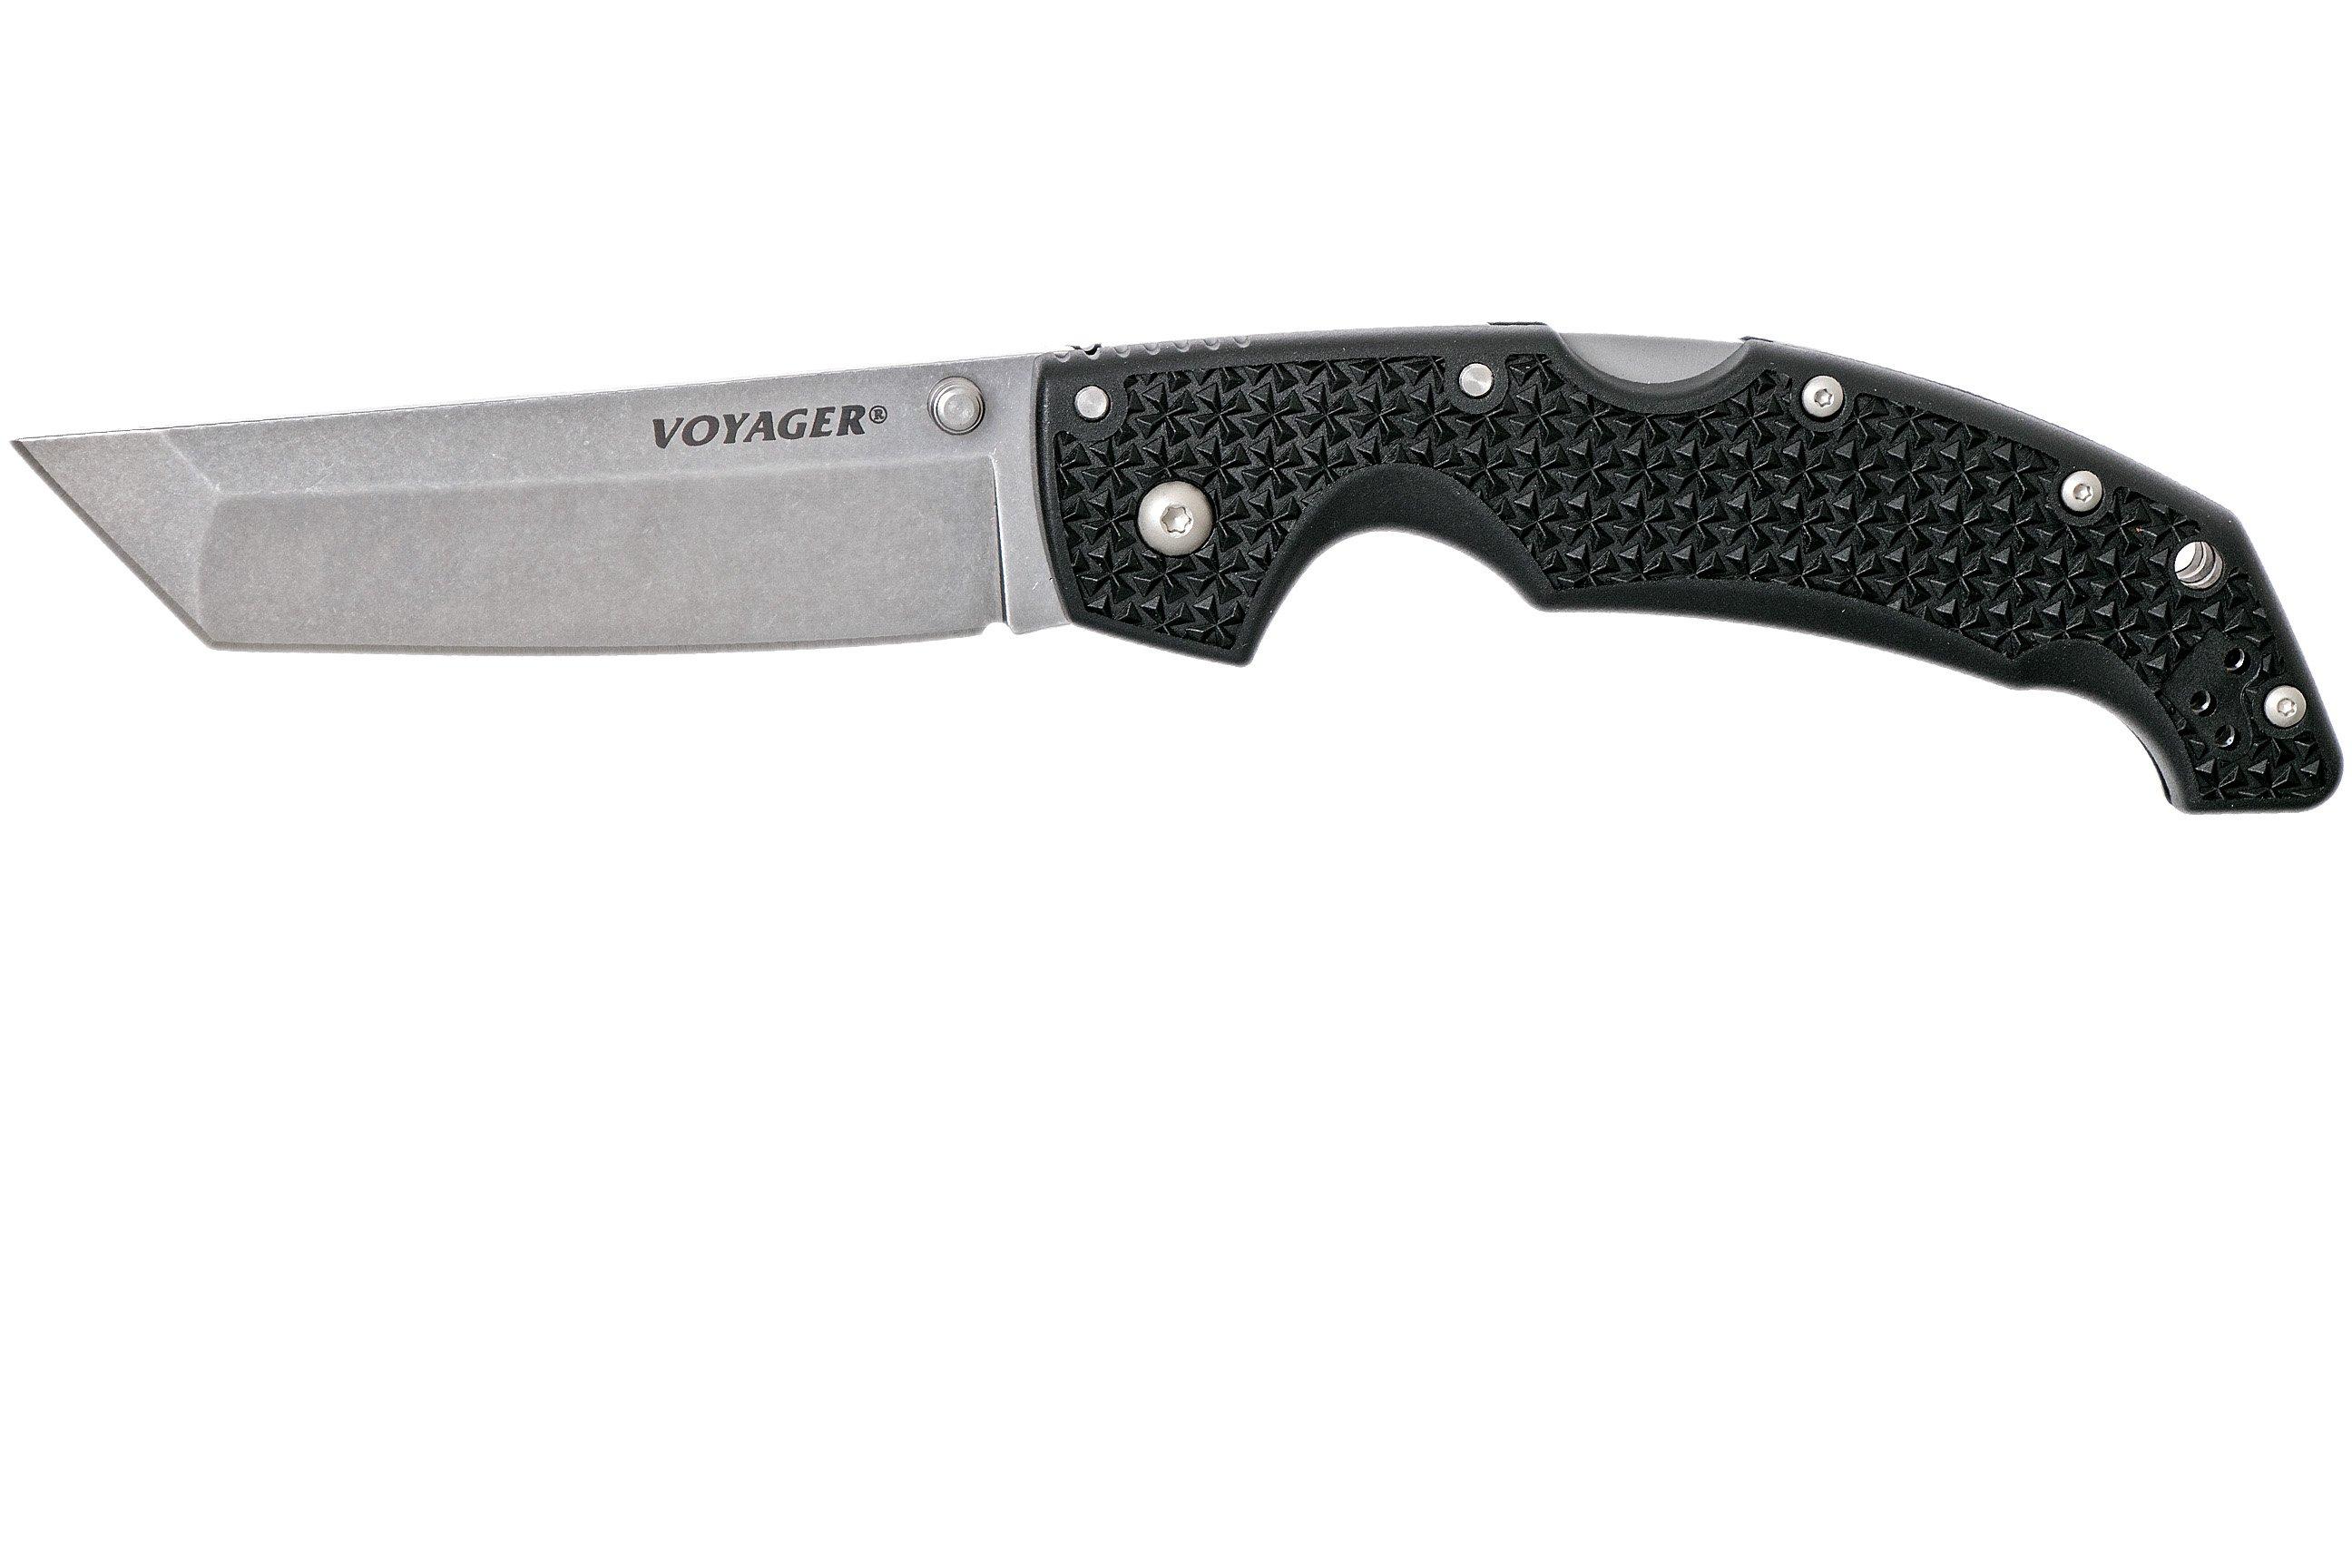 cold steel voyager large tanto review